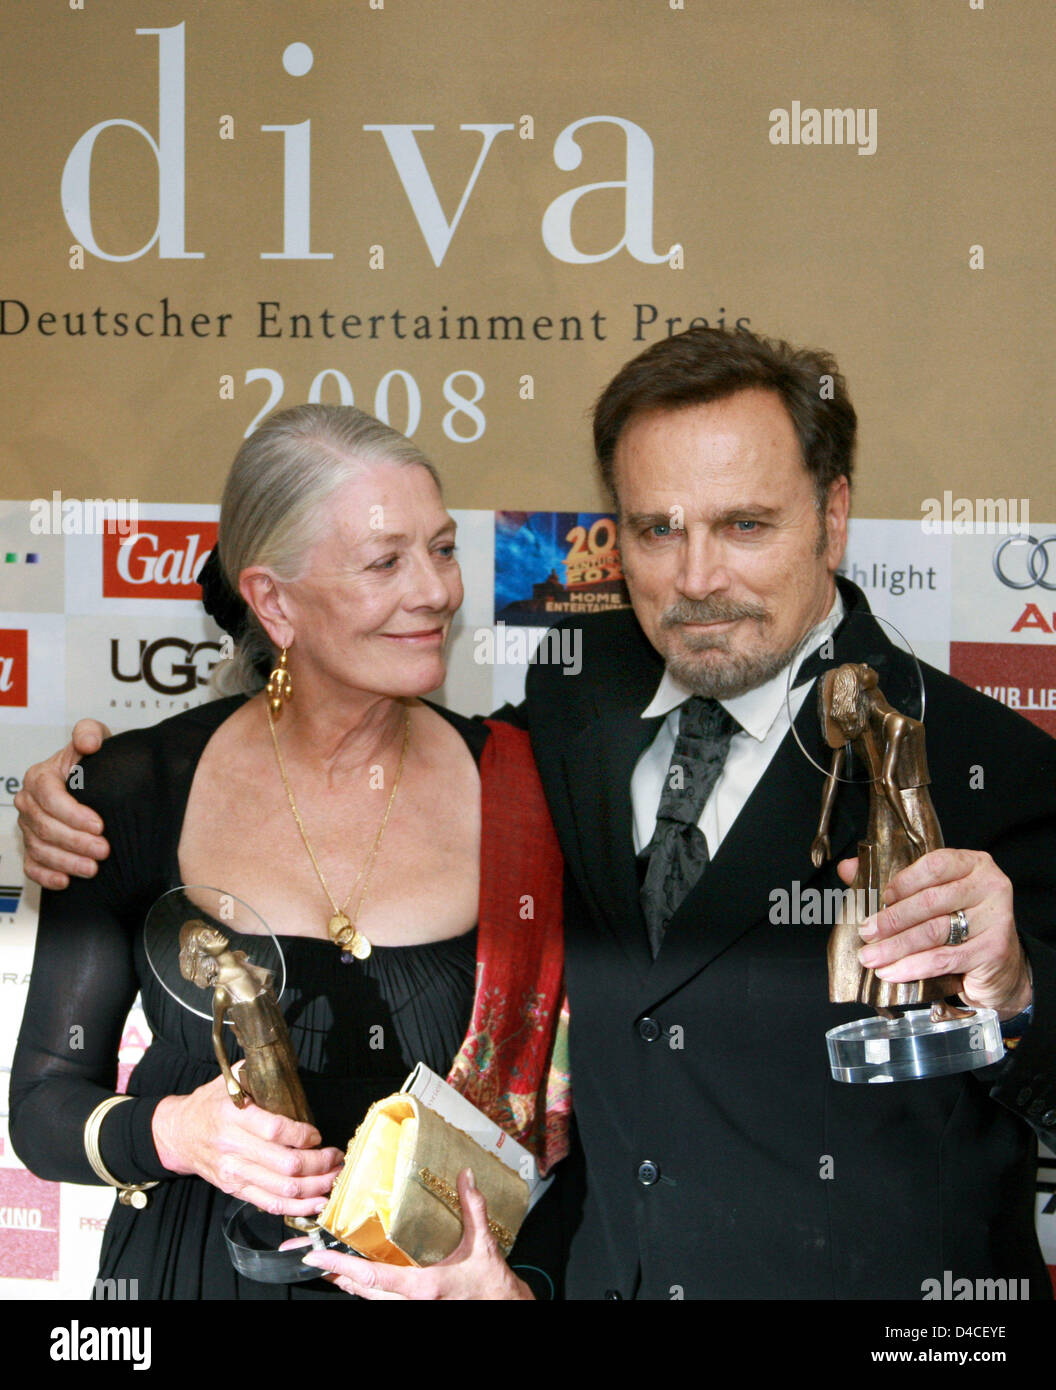 Italian actor Franco Nero and his wife British actress Vanessa Redgrave present their Diva awards at the Diva entertainment award gala in Munich, 24 January 2008. Both were admitted to the Diva 'Hall of Fame'. Alltogether 14 divas were awarded to artists and people in the media business in the categories Jury Award, Audience Award and 'Hall of Fame'. Photo: URSULA DUEREN Stock Photo